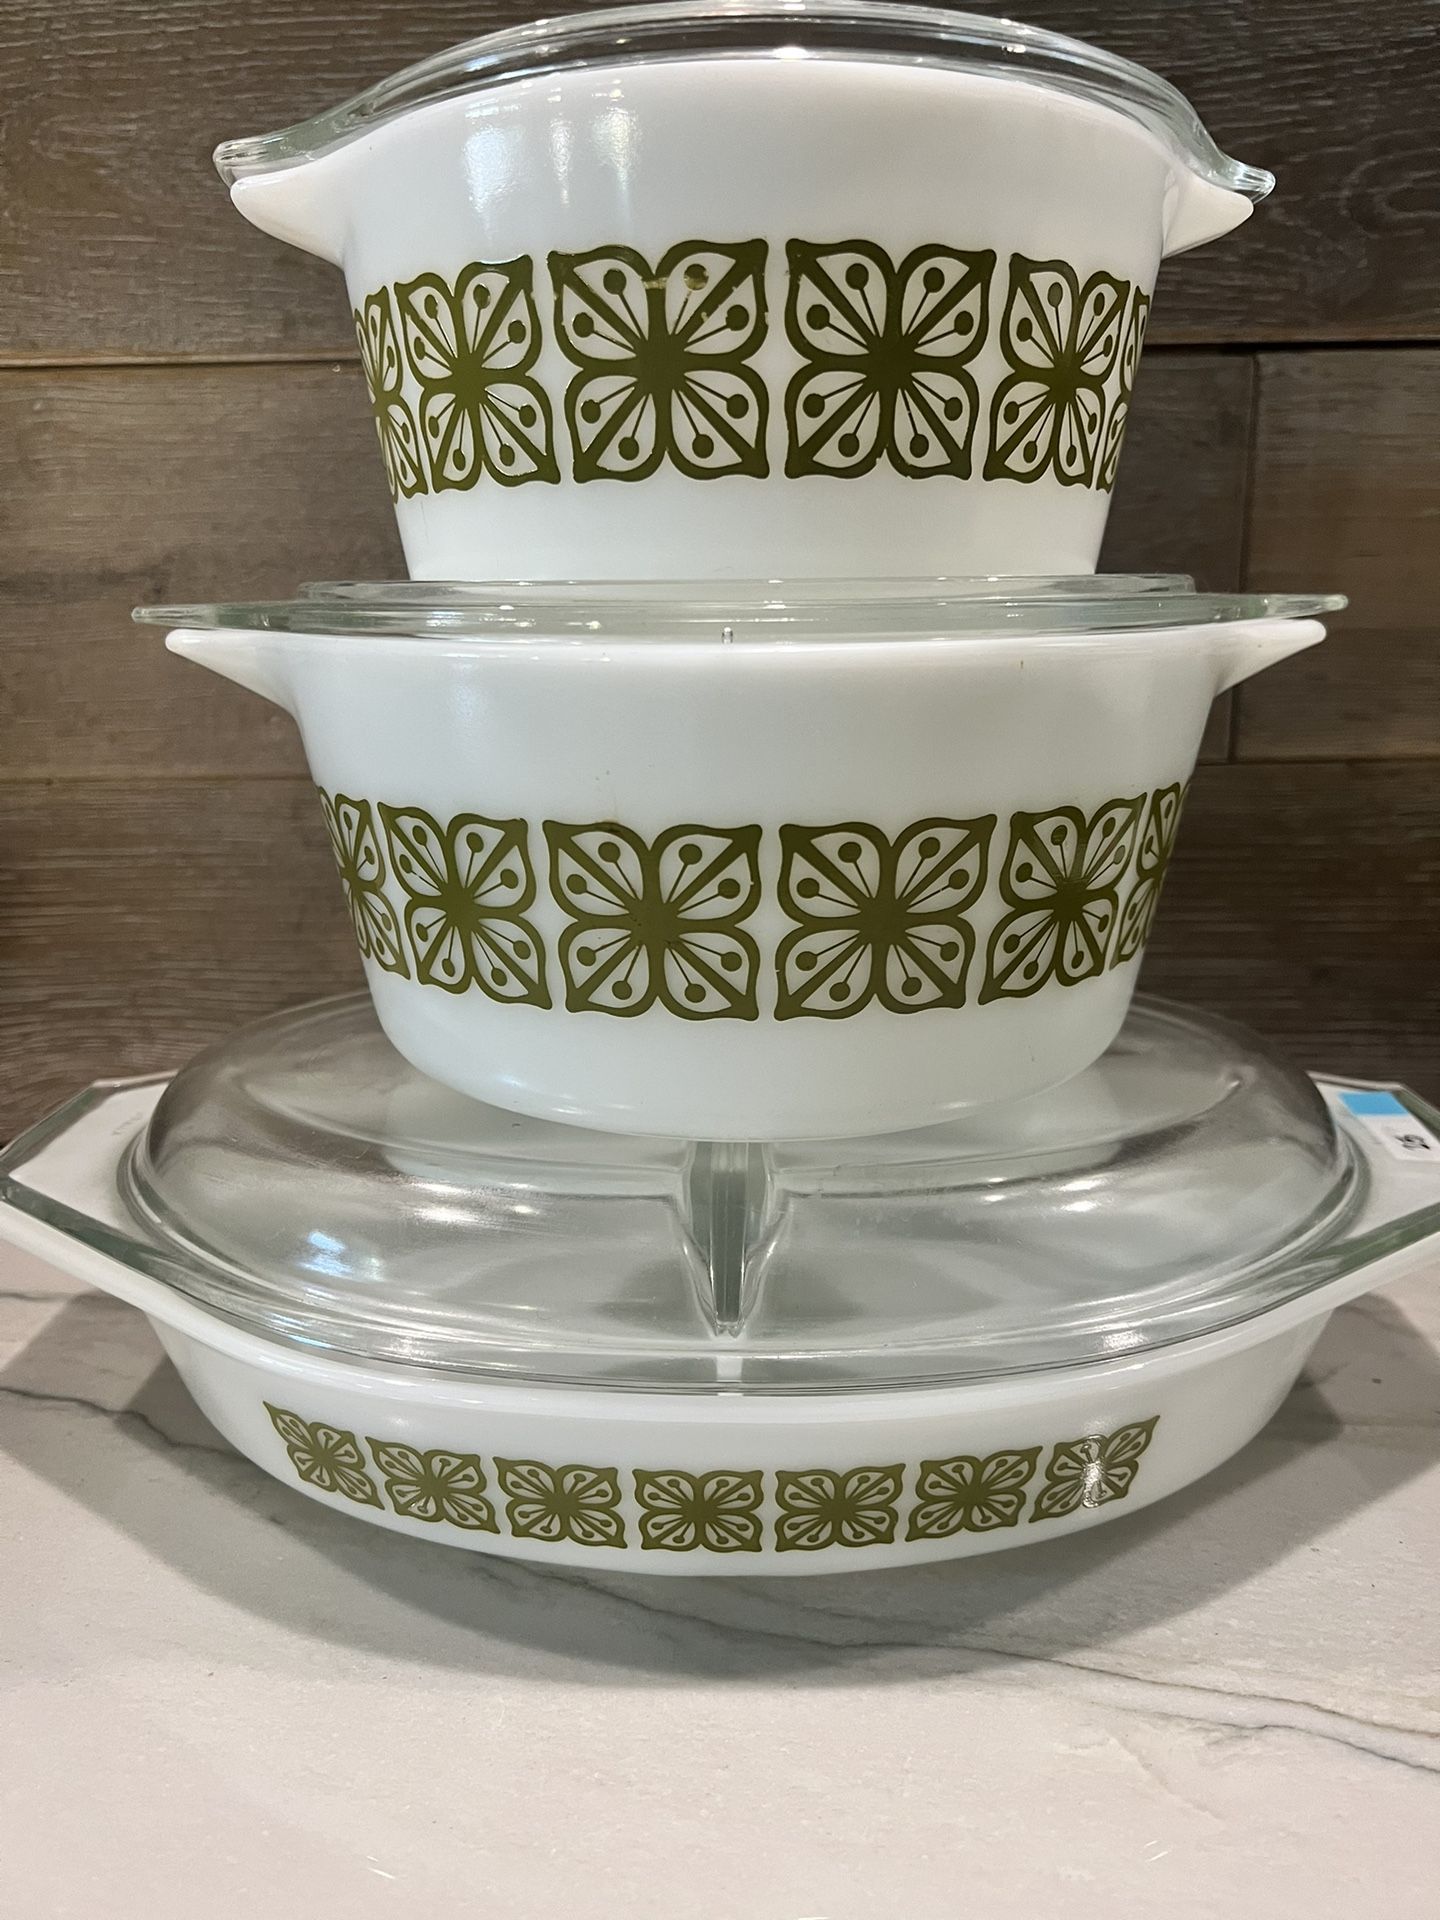 Vintage Pyrex Glass Percolator for Sale in Riverside, CA - OfferUp